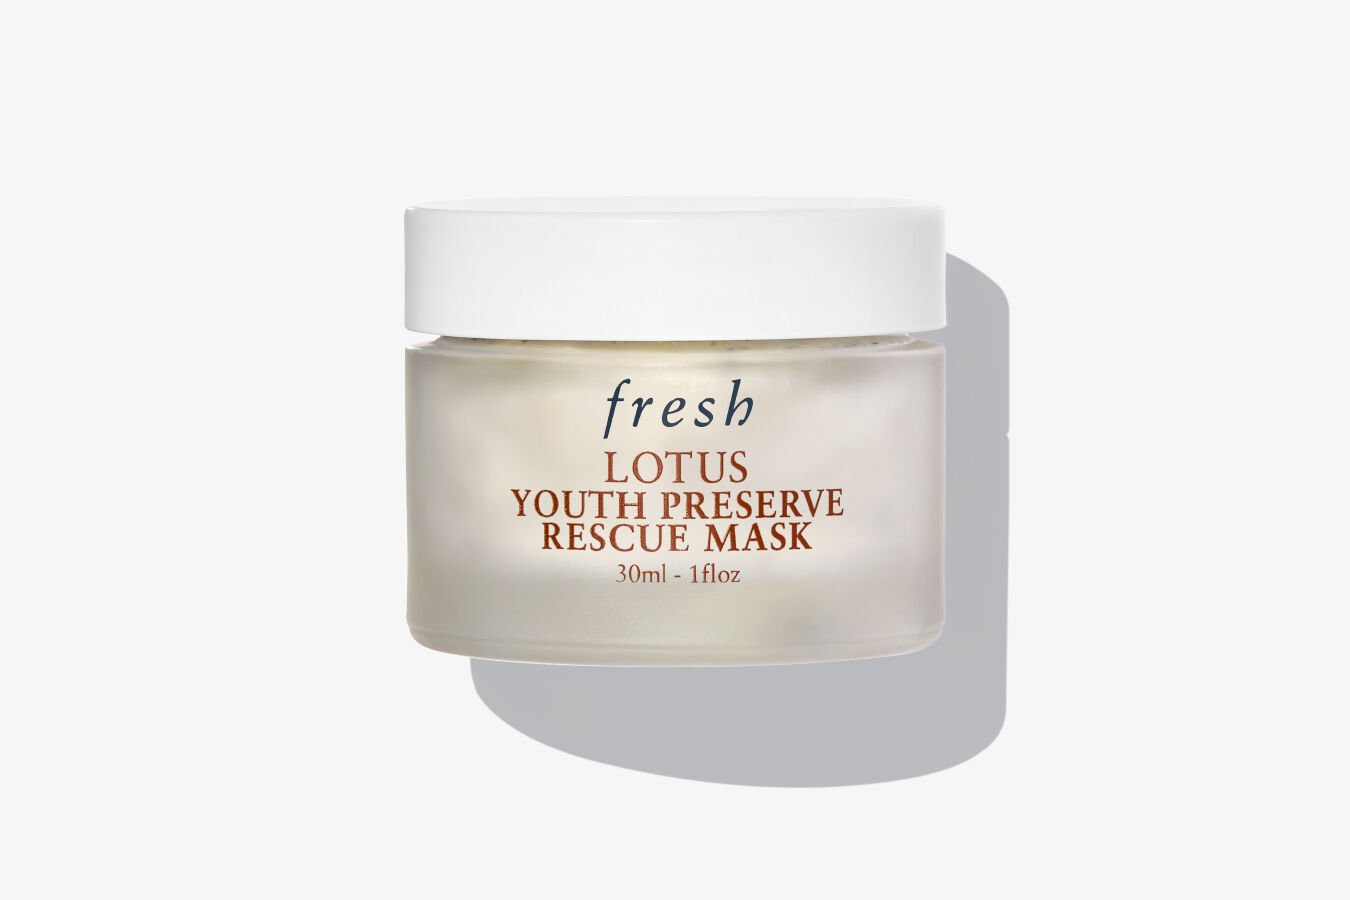 Lotus Youth Preserve Exfoliating Rescue Mask